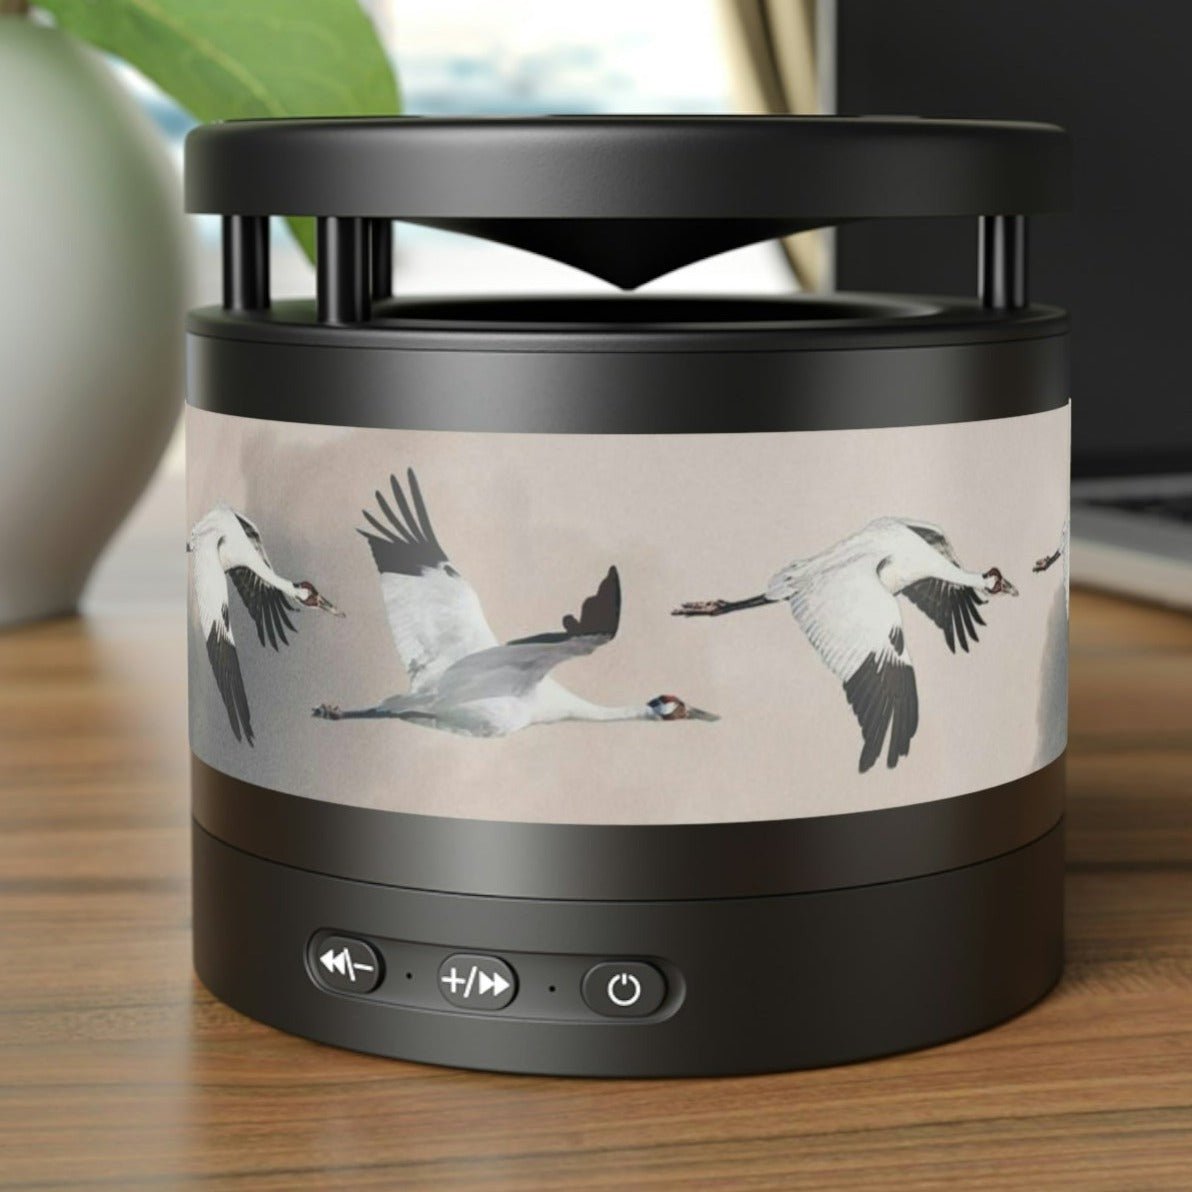 Whooping Cranes Flying Metal Bluetooth Speaker and Wireless Charging Pad